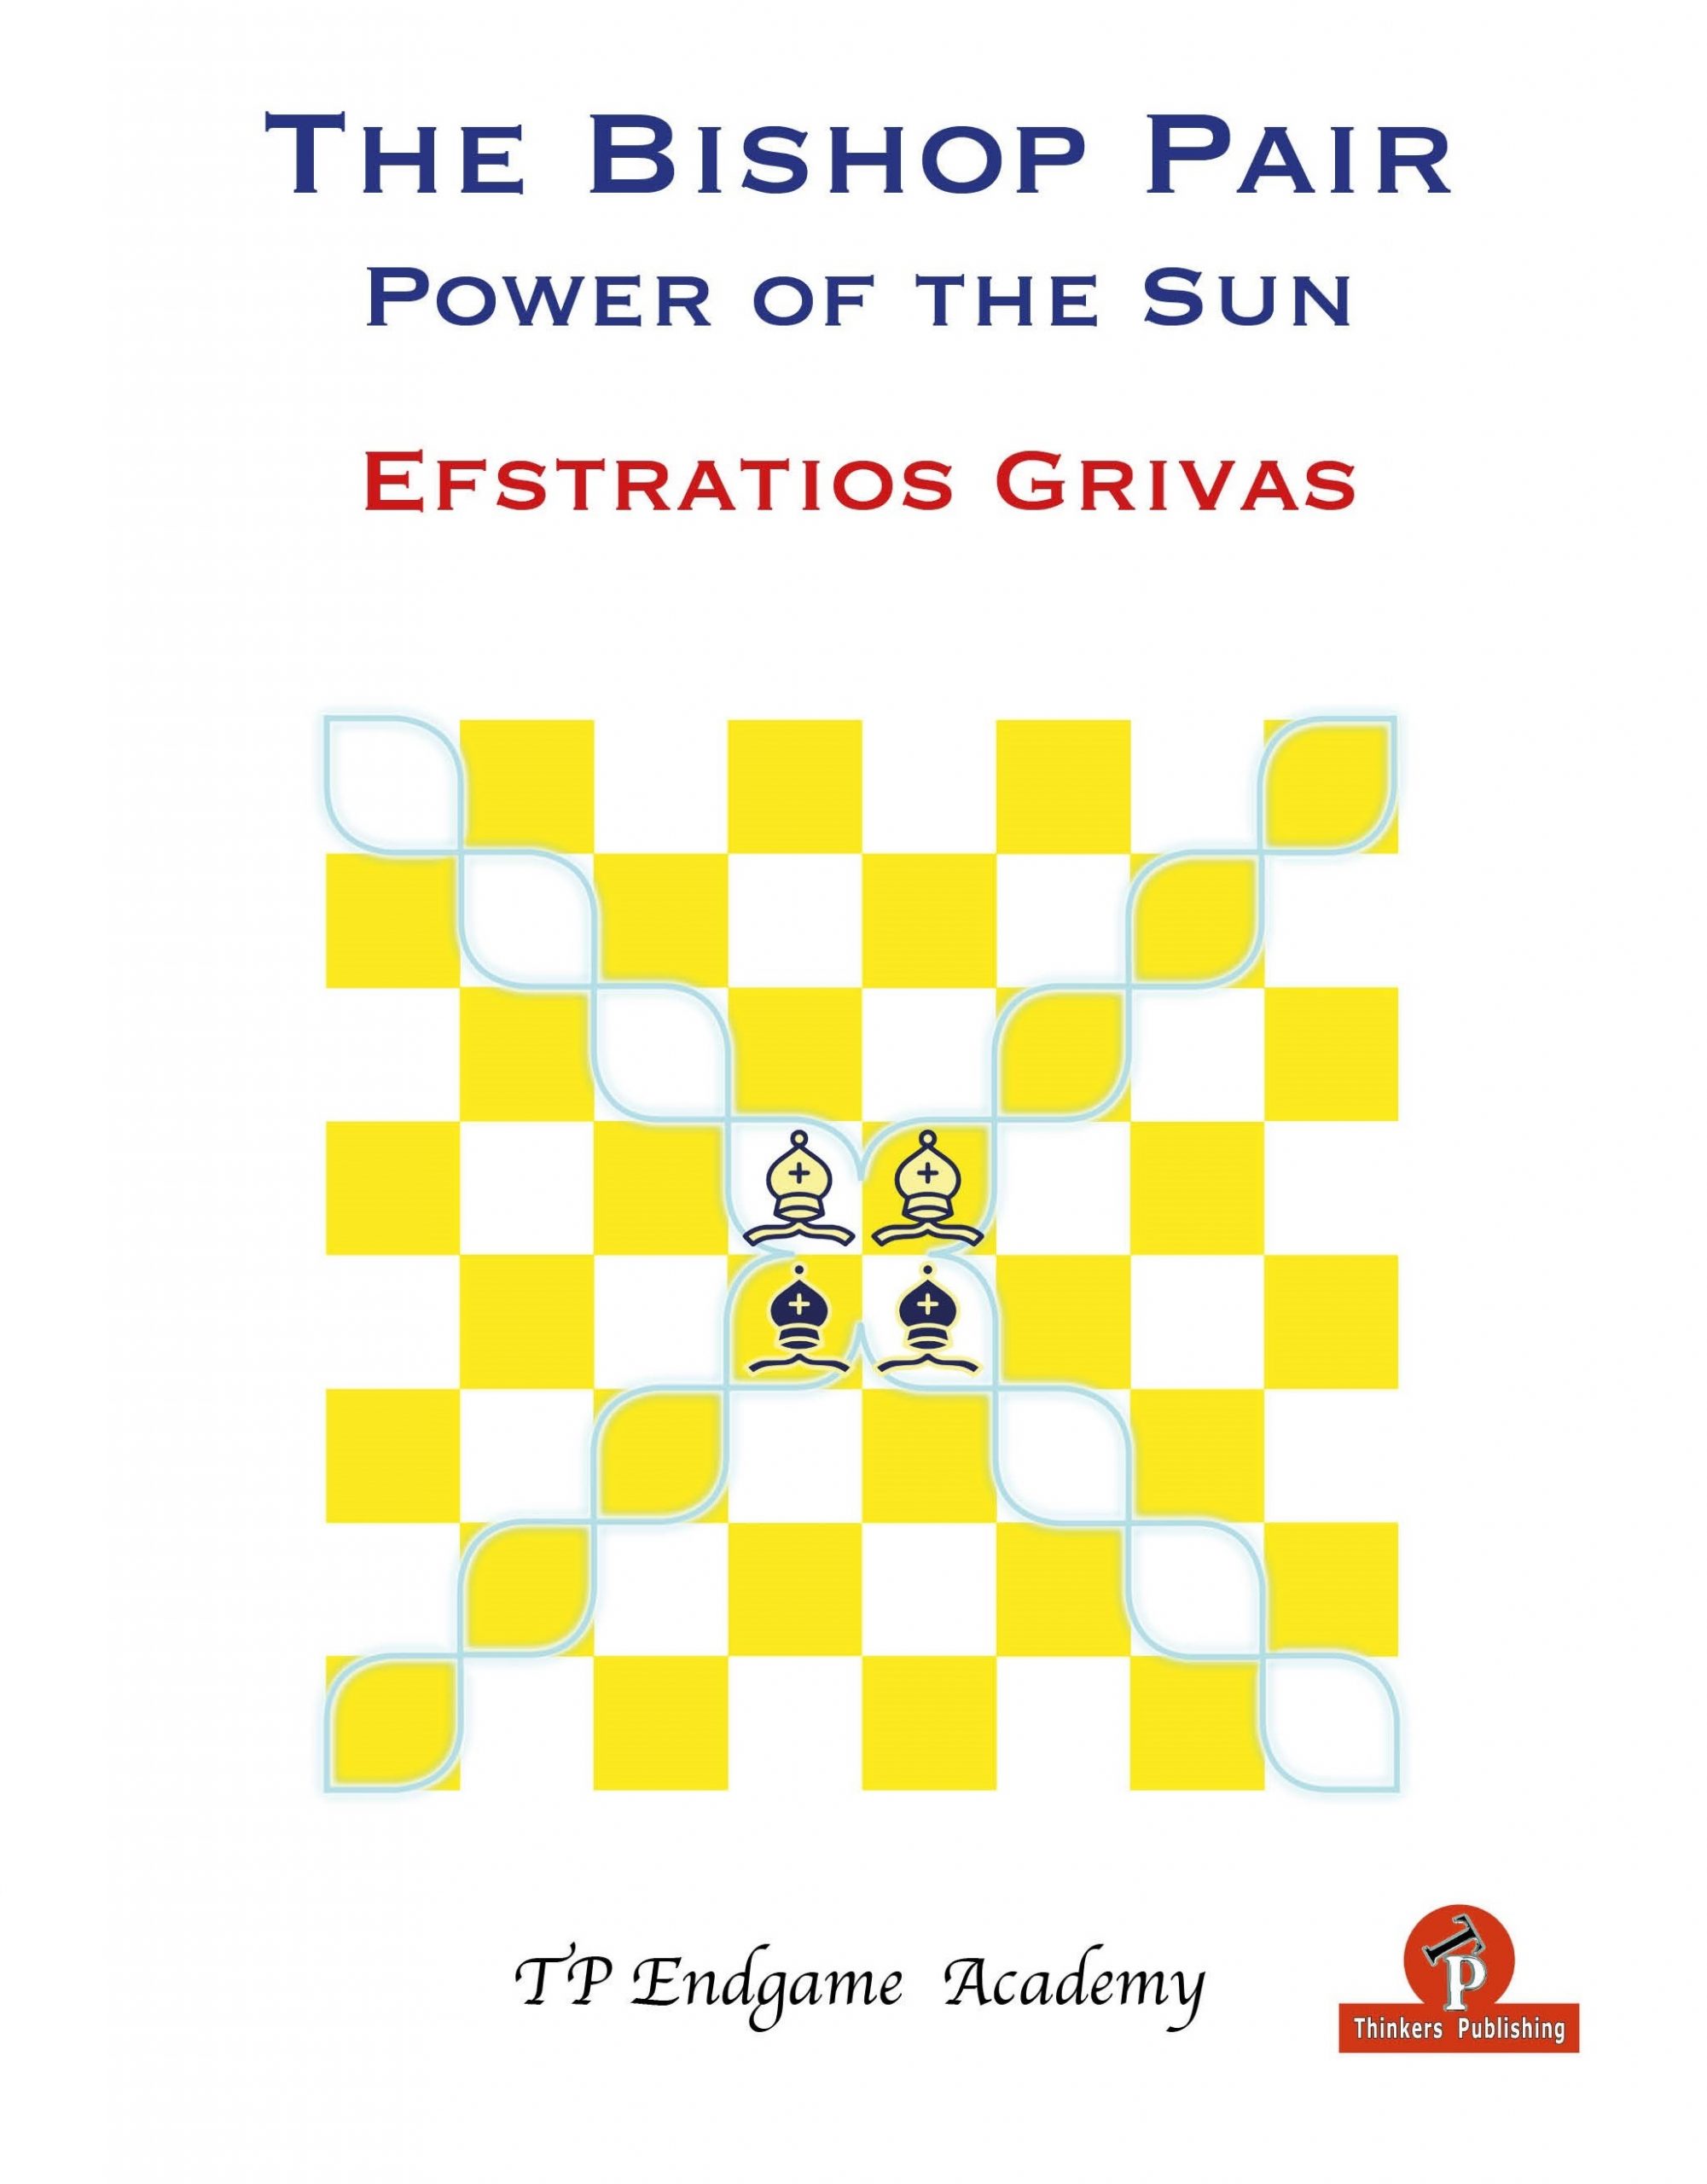 Grivas: The Bishop Pair – Power of the Sun